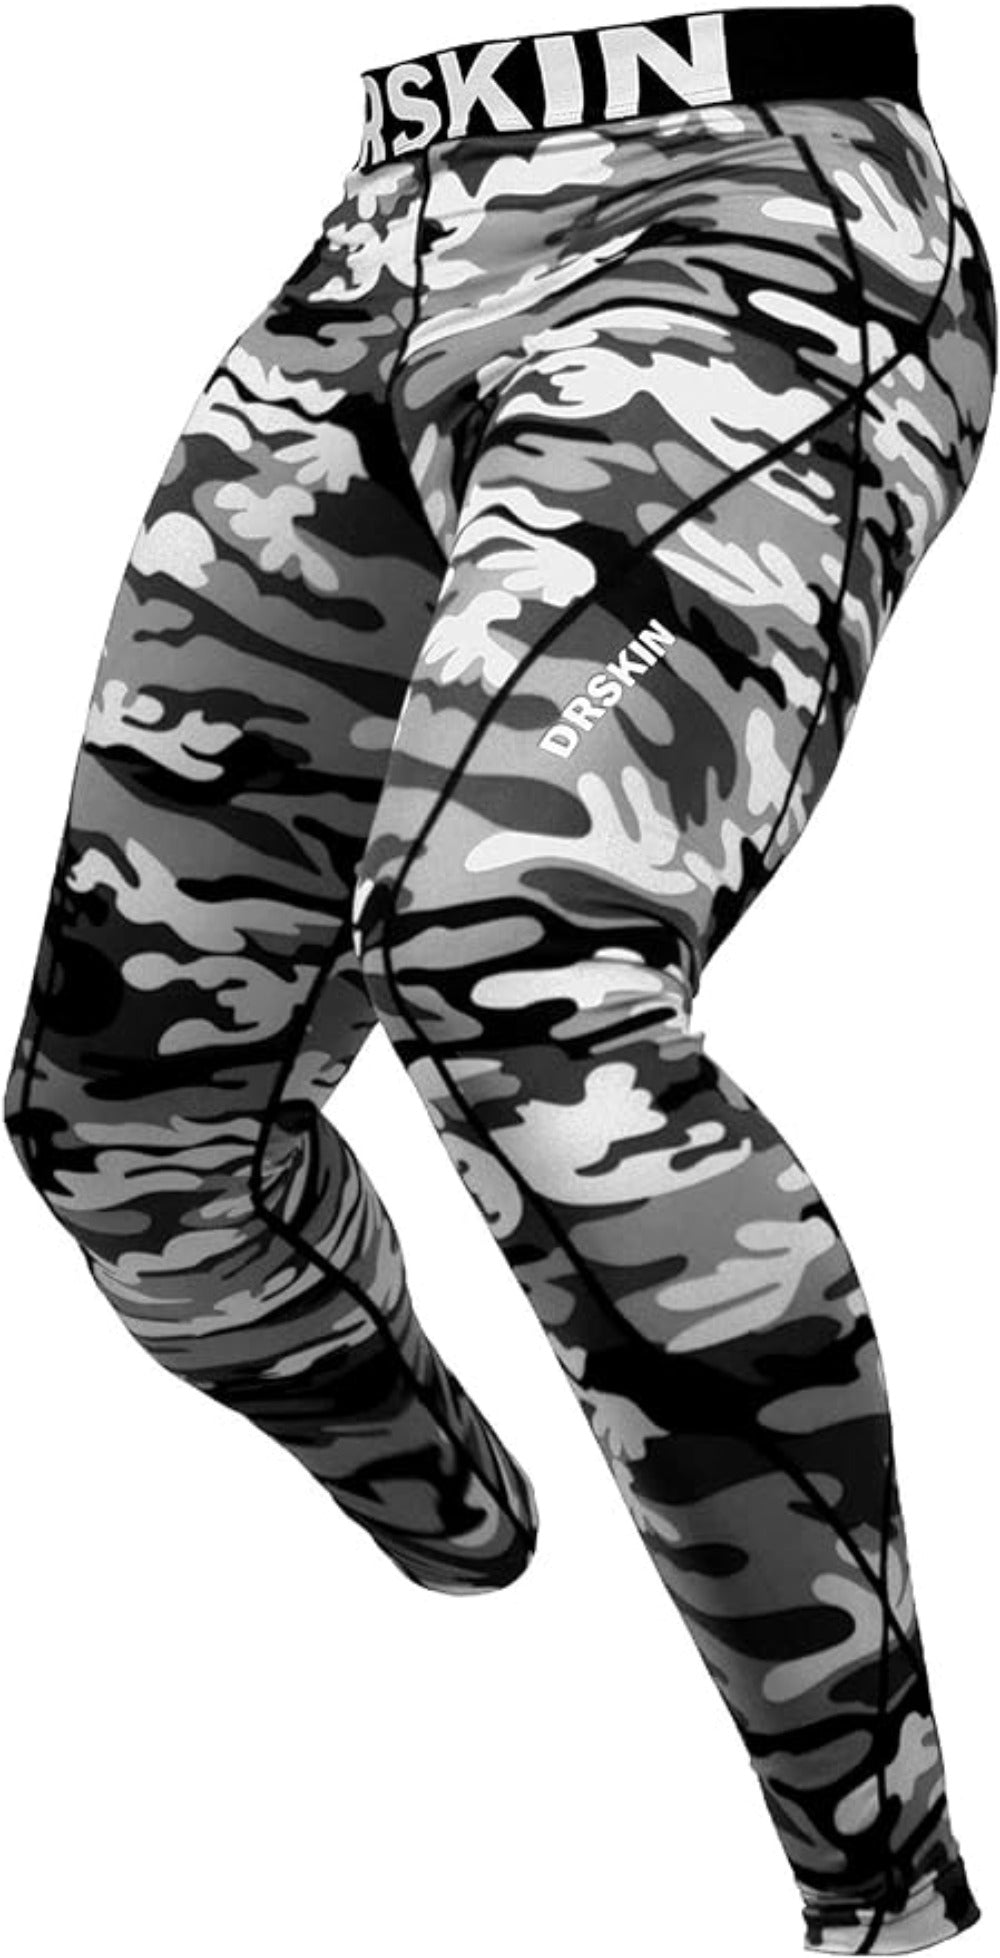 Powergear Dry Fit Compression Pants CamoGray 1P